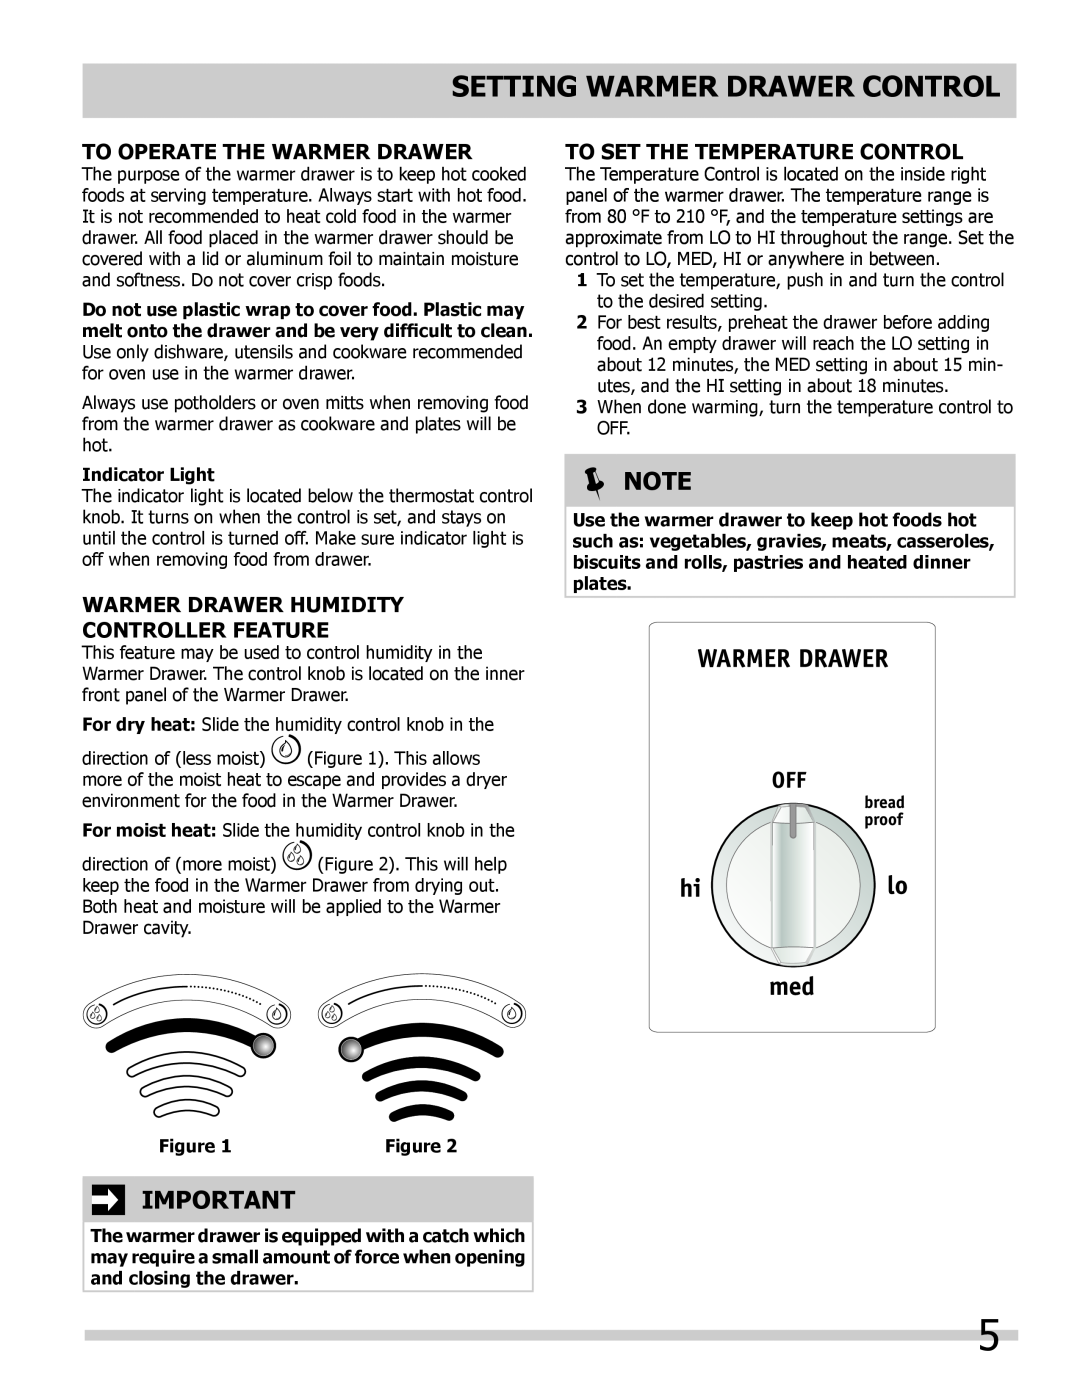 Frigidaire 318201024 setting WARMER DRAWER control, Note, To Operate the Warmer Drawer, To Set the Temperature Control 